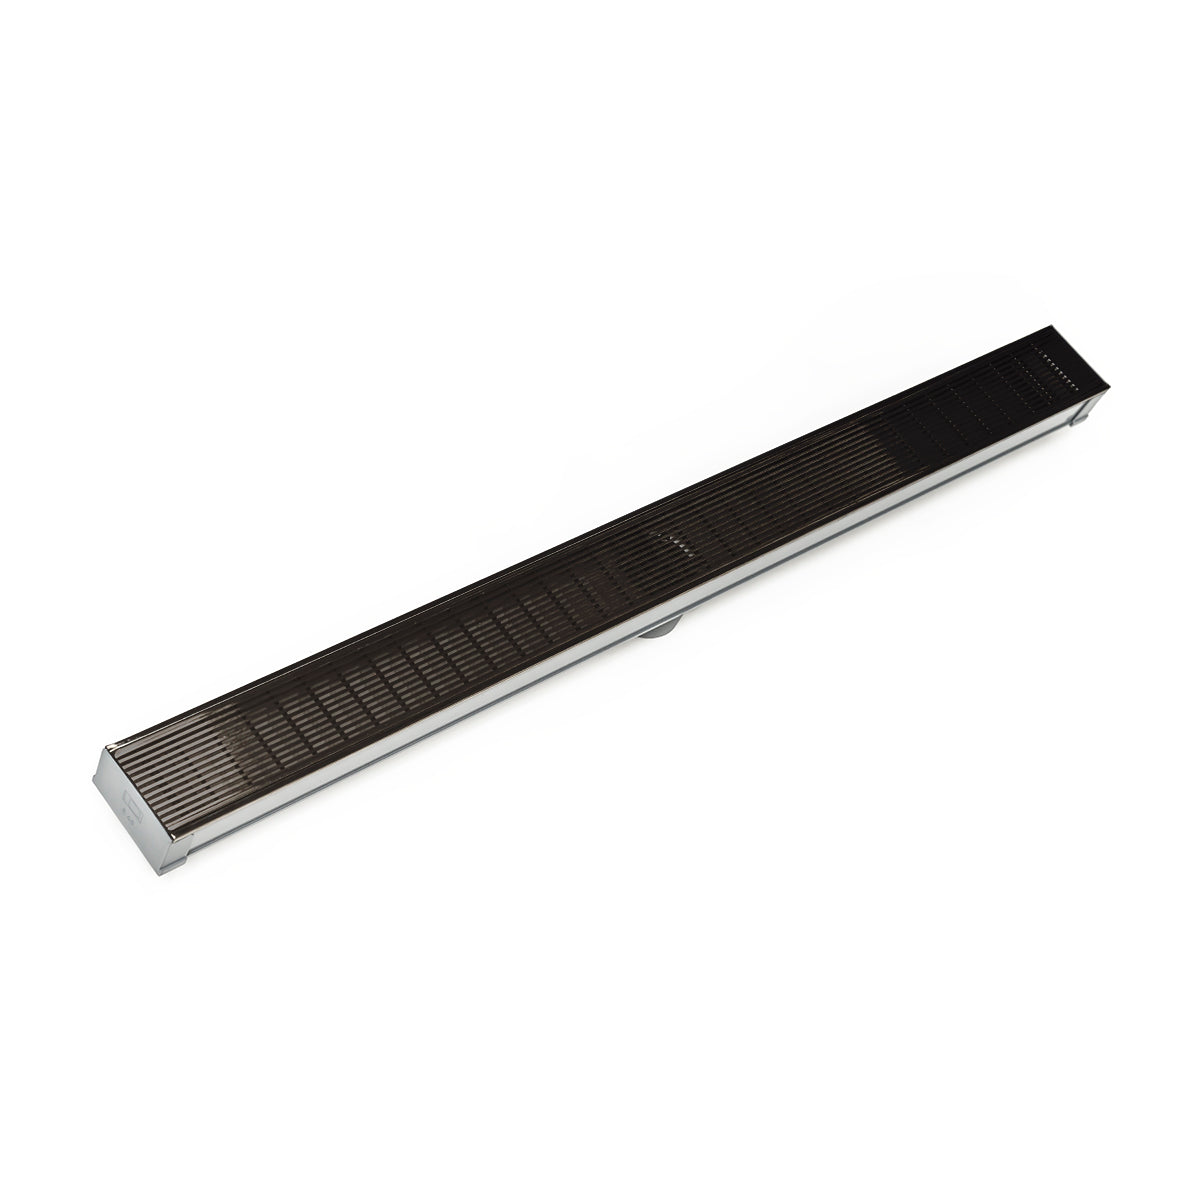 Infinity Drain 72" S-PVC Series Low Profile Site Sizable Linear Drain Kit with 2 1/2" Wedge Wire Grate